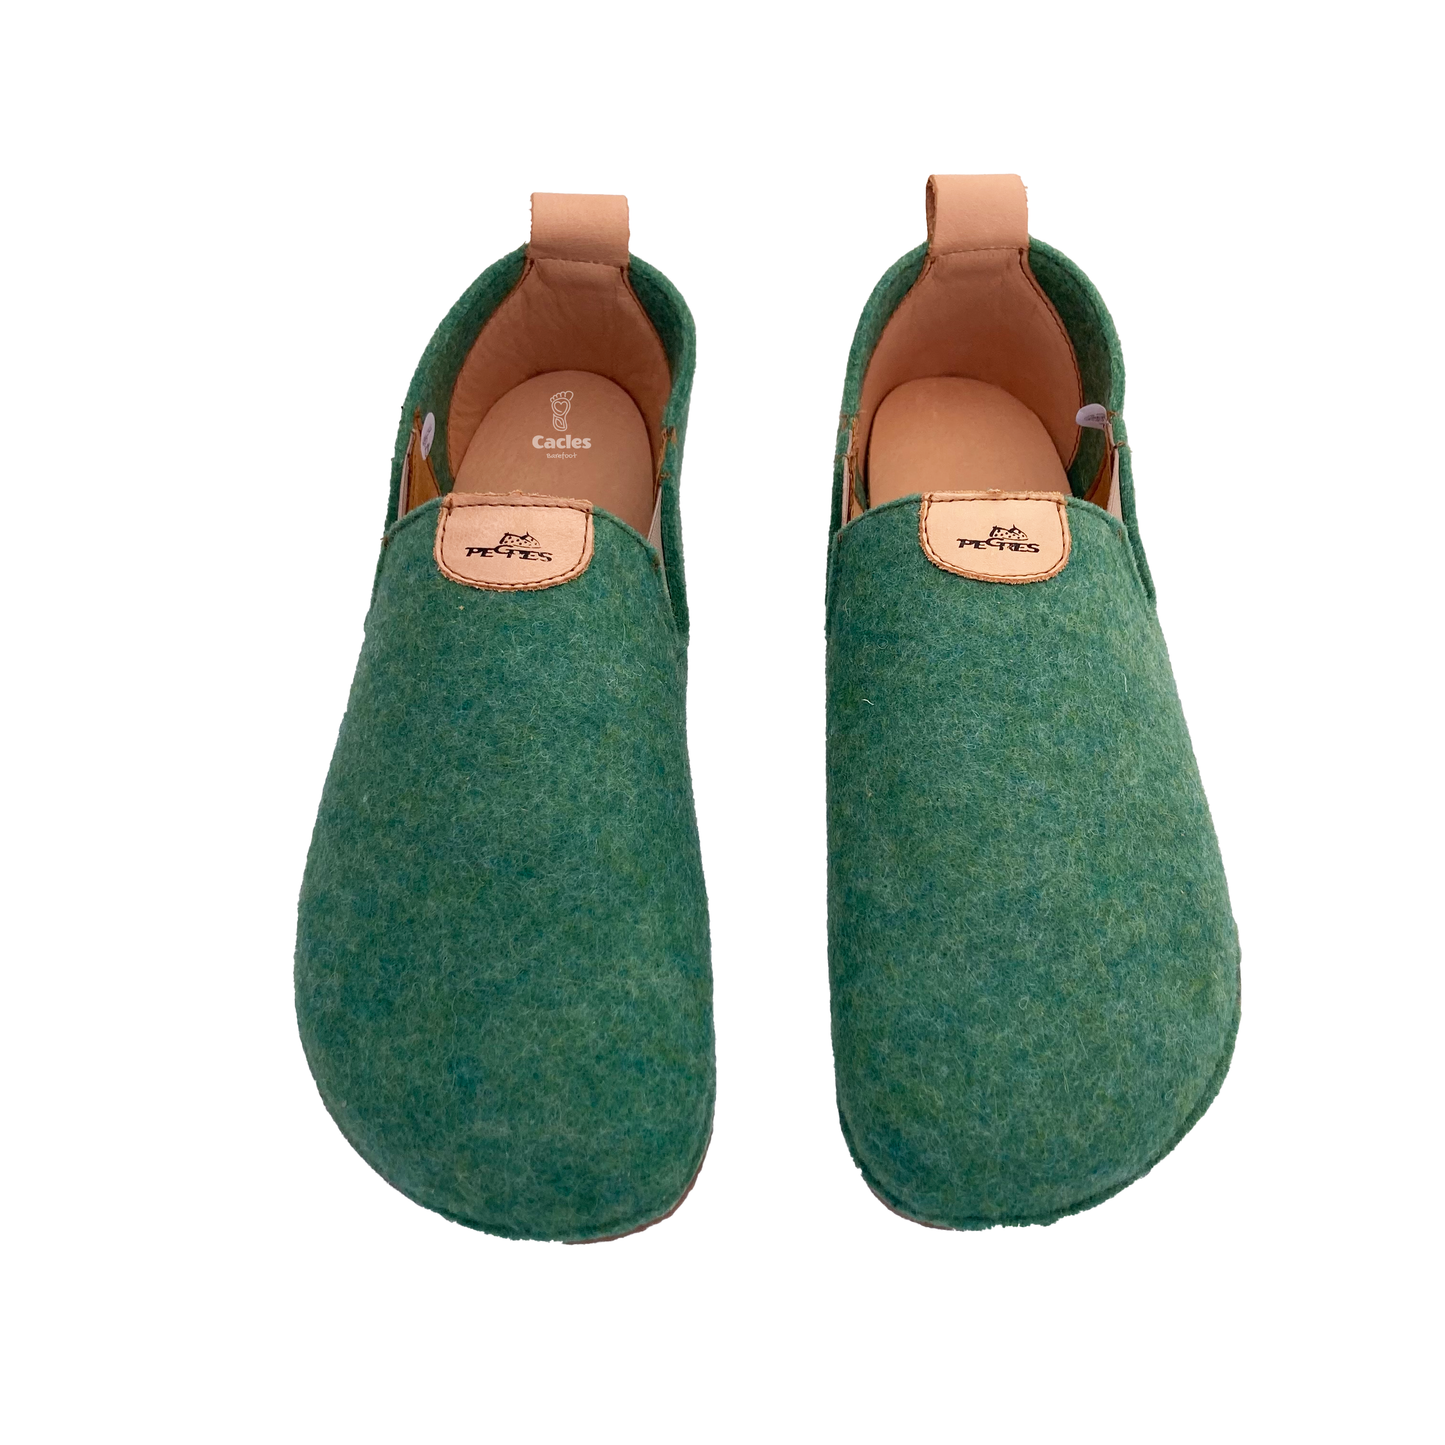 Pegres - slippers barefoot adulto - verde-Pegres-Cacles Barefoot